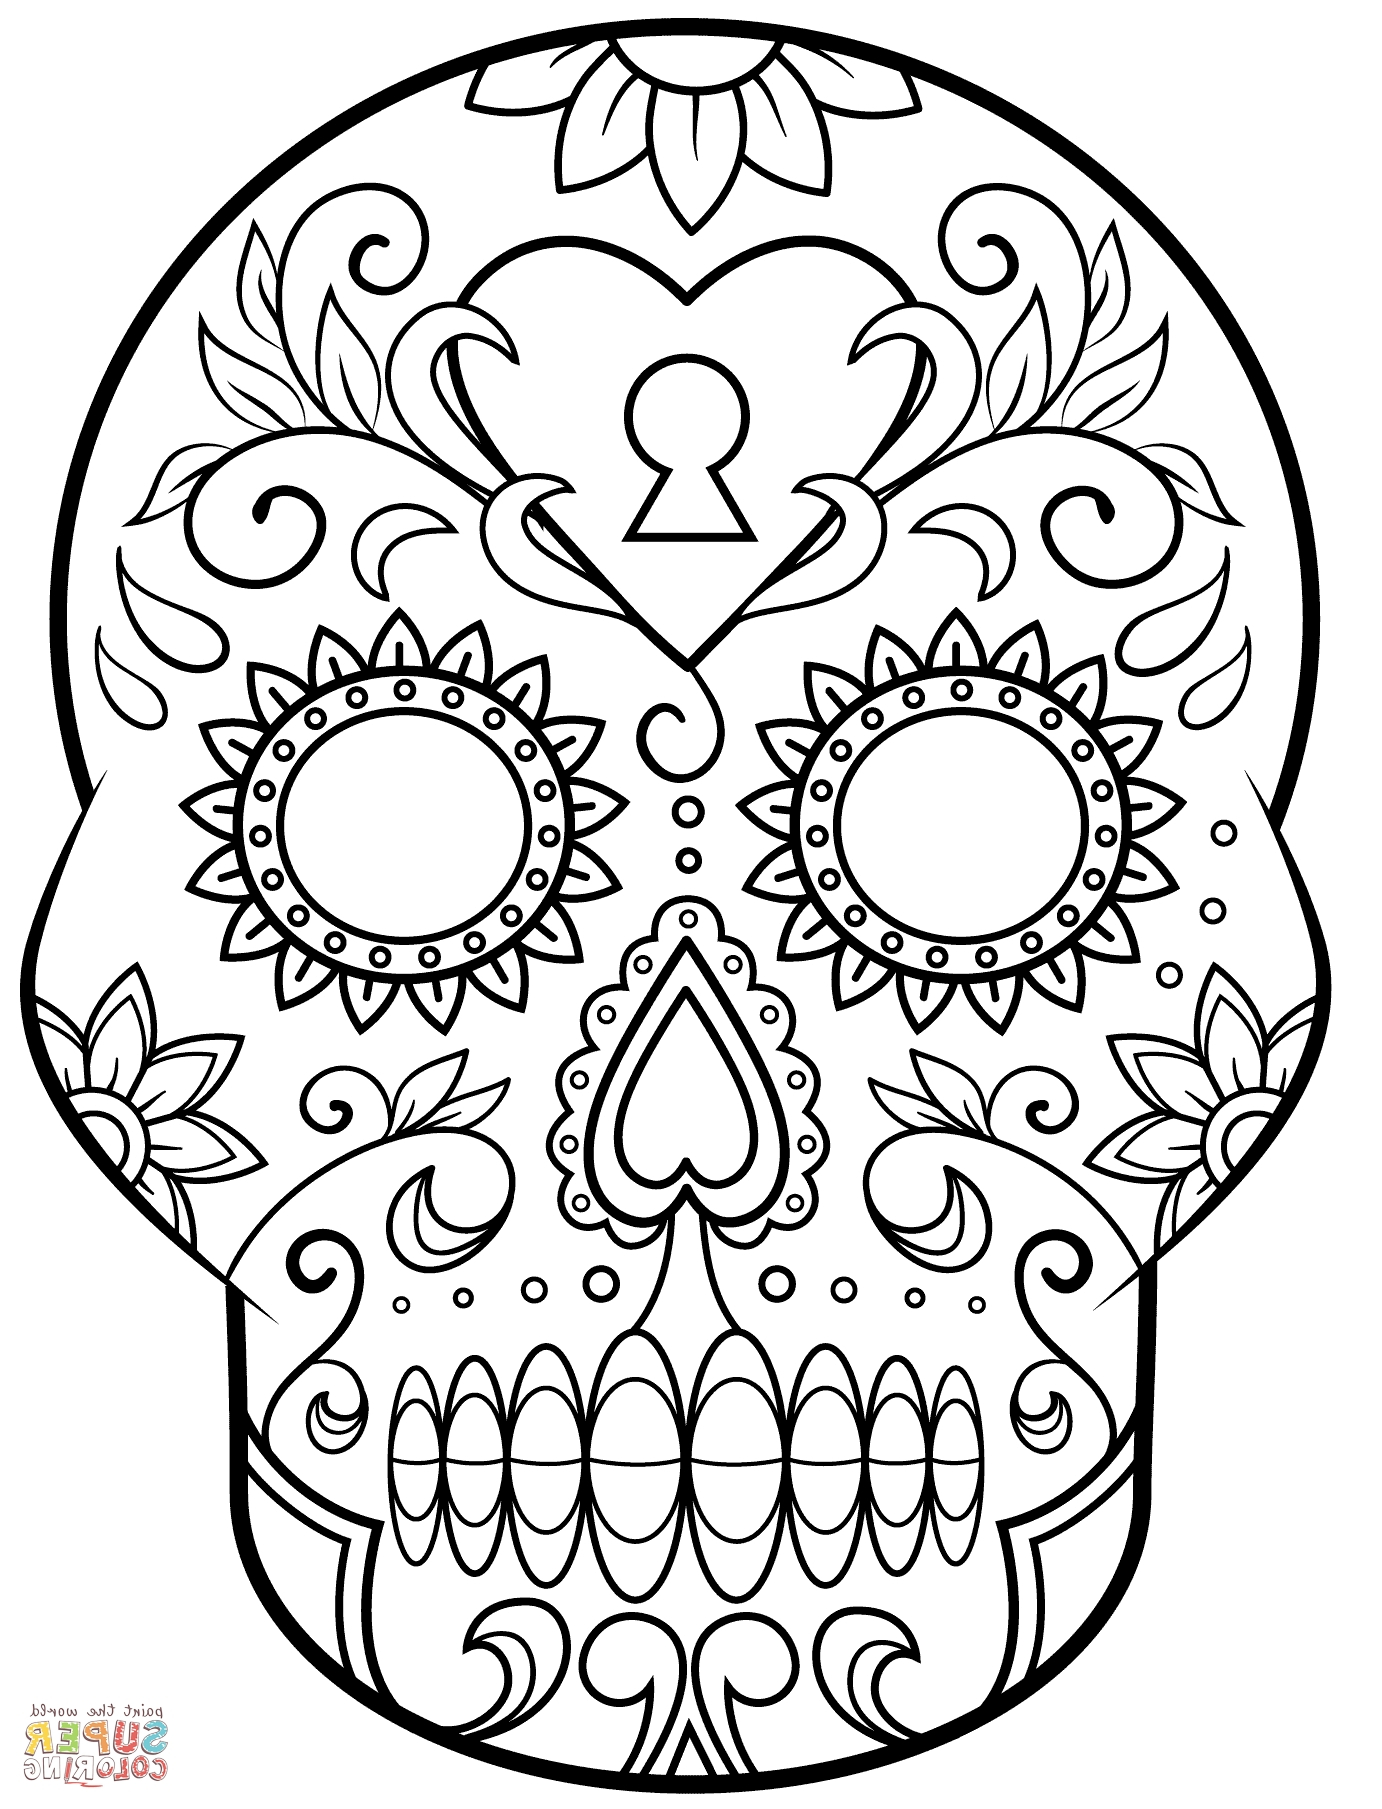 Free Printable Day Of The Dead Coloring Pages | Crafted Here - Free Printable Day Of The Dead Coloring Pages